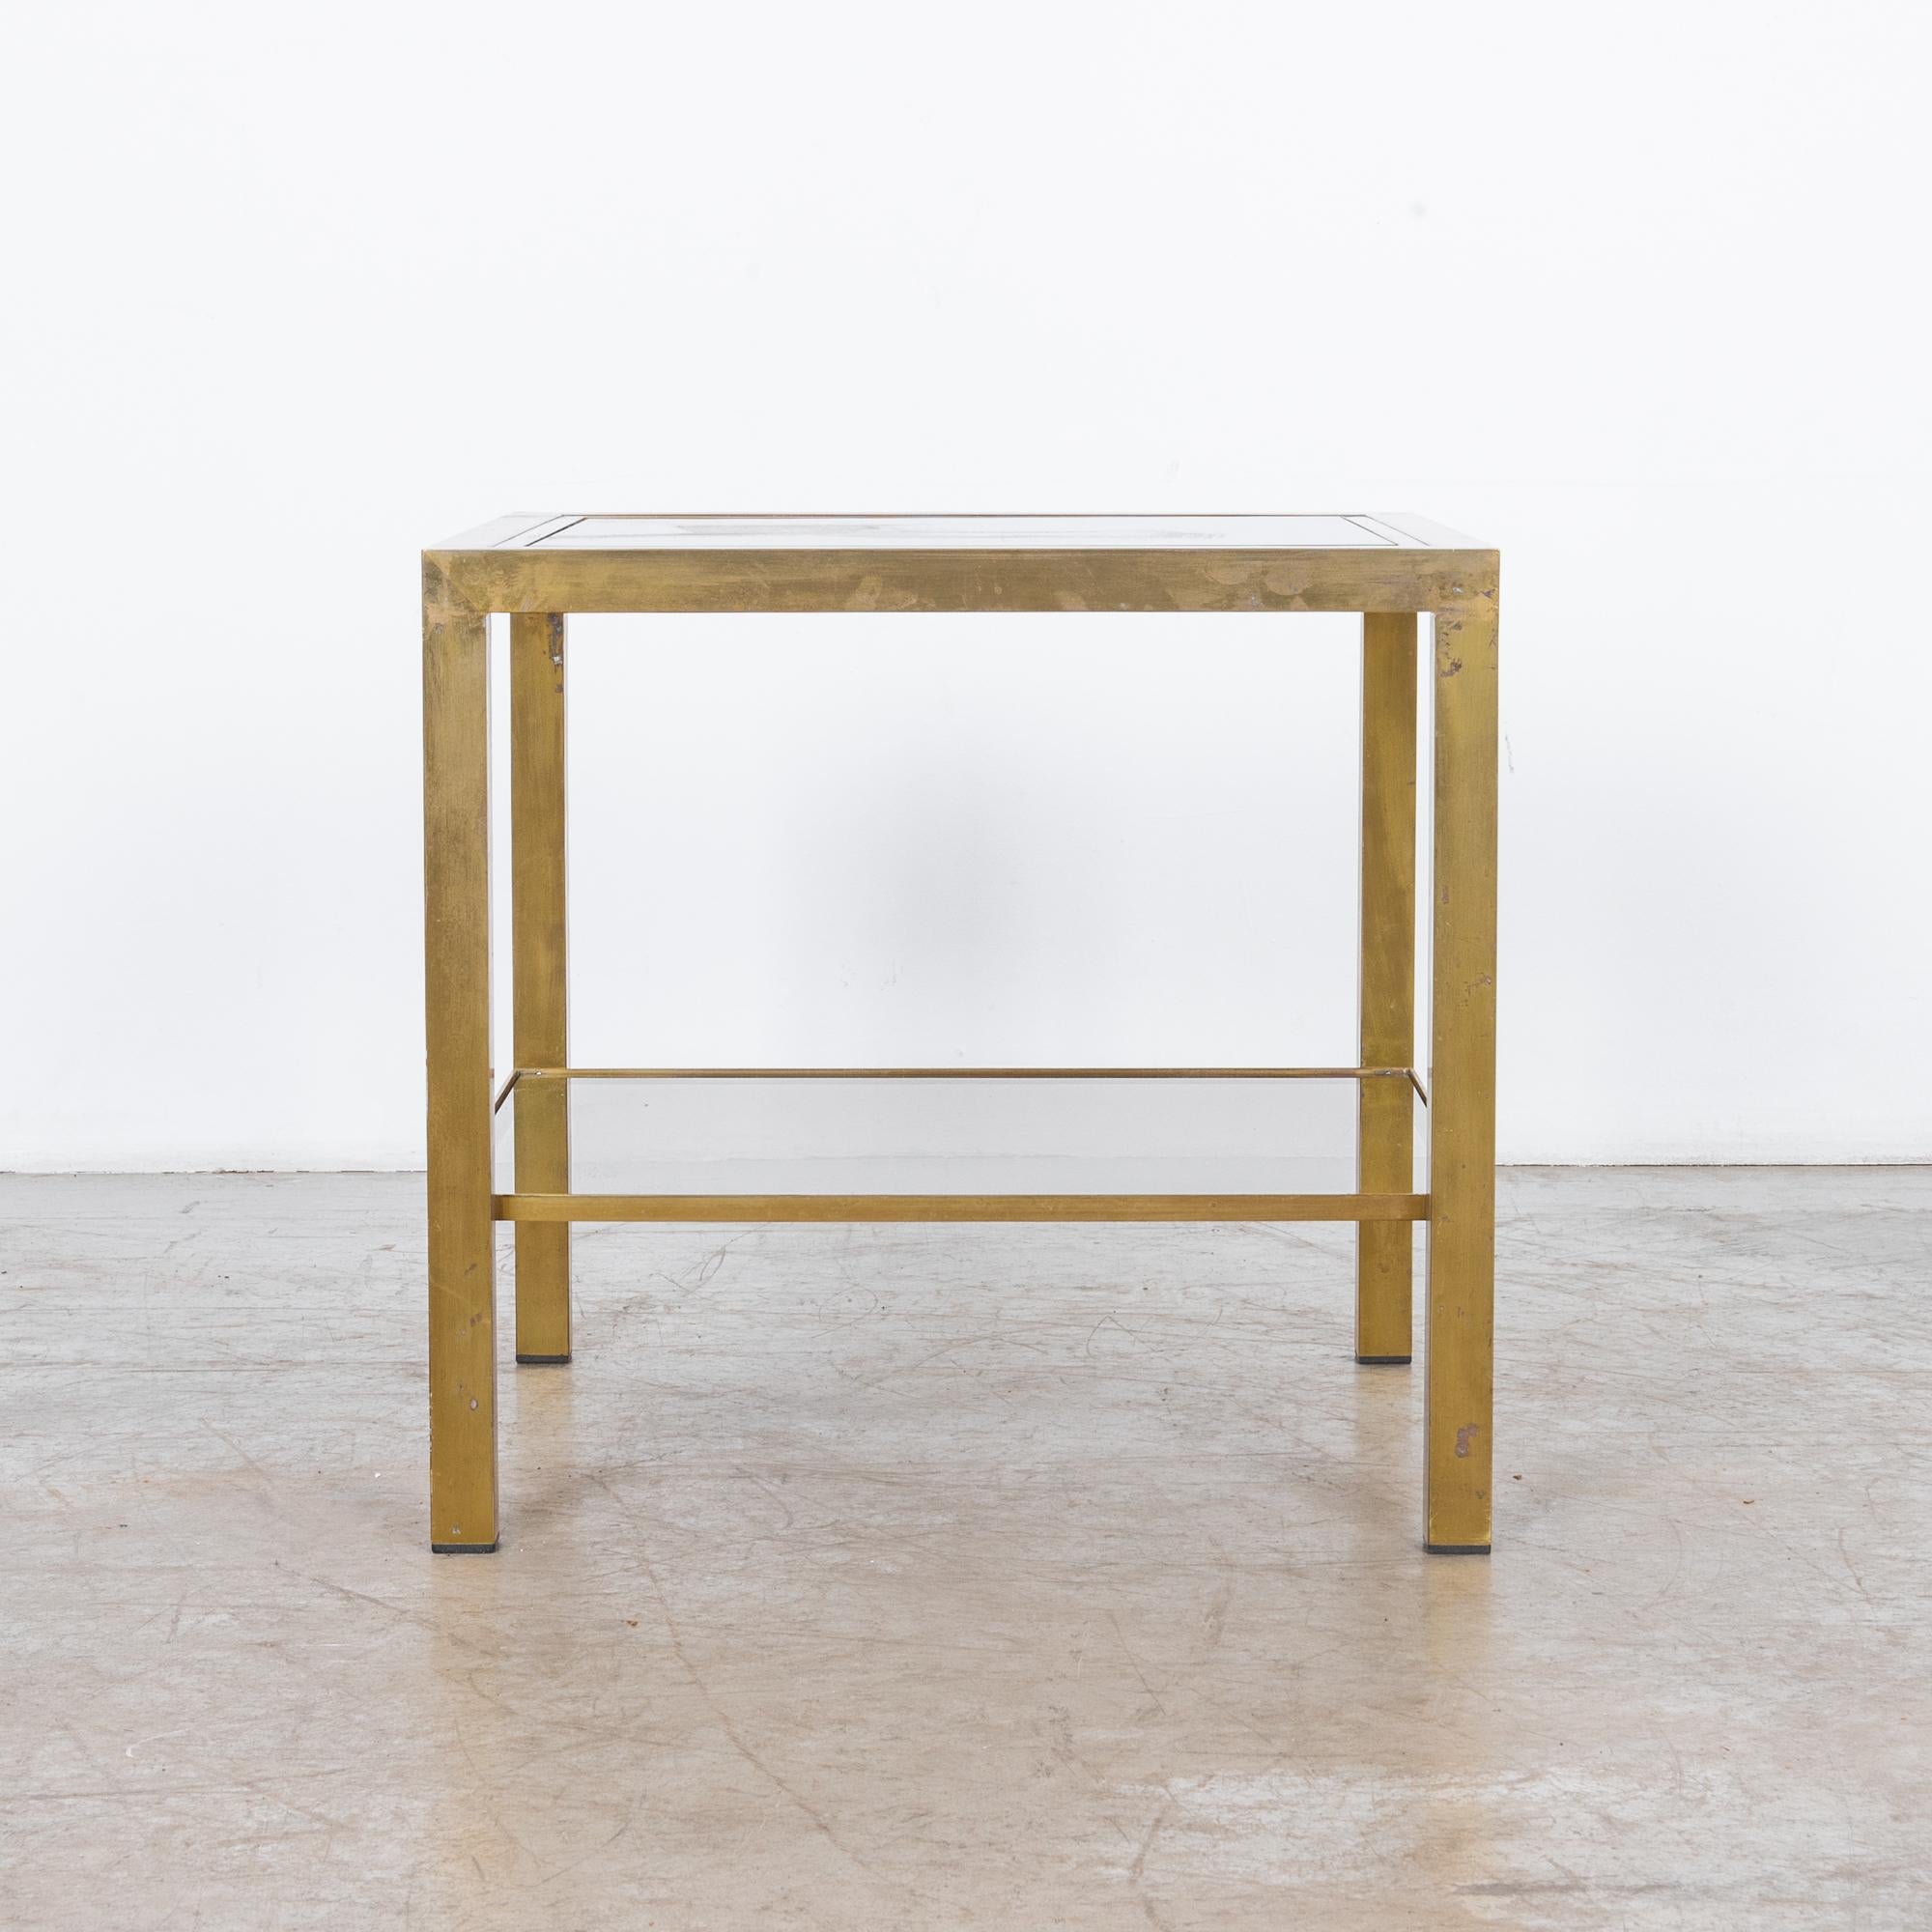 Stylish coffee table with glass top and brass-plated legs. Metal and glass, a timeless combination. The optical properties recall cathedrals and palaces, an association with light. Adopted and expanded in the industrial age with straight edges and